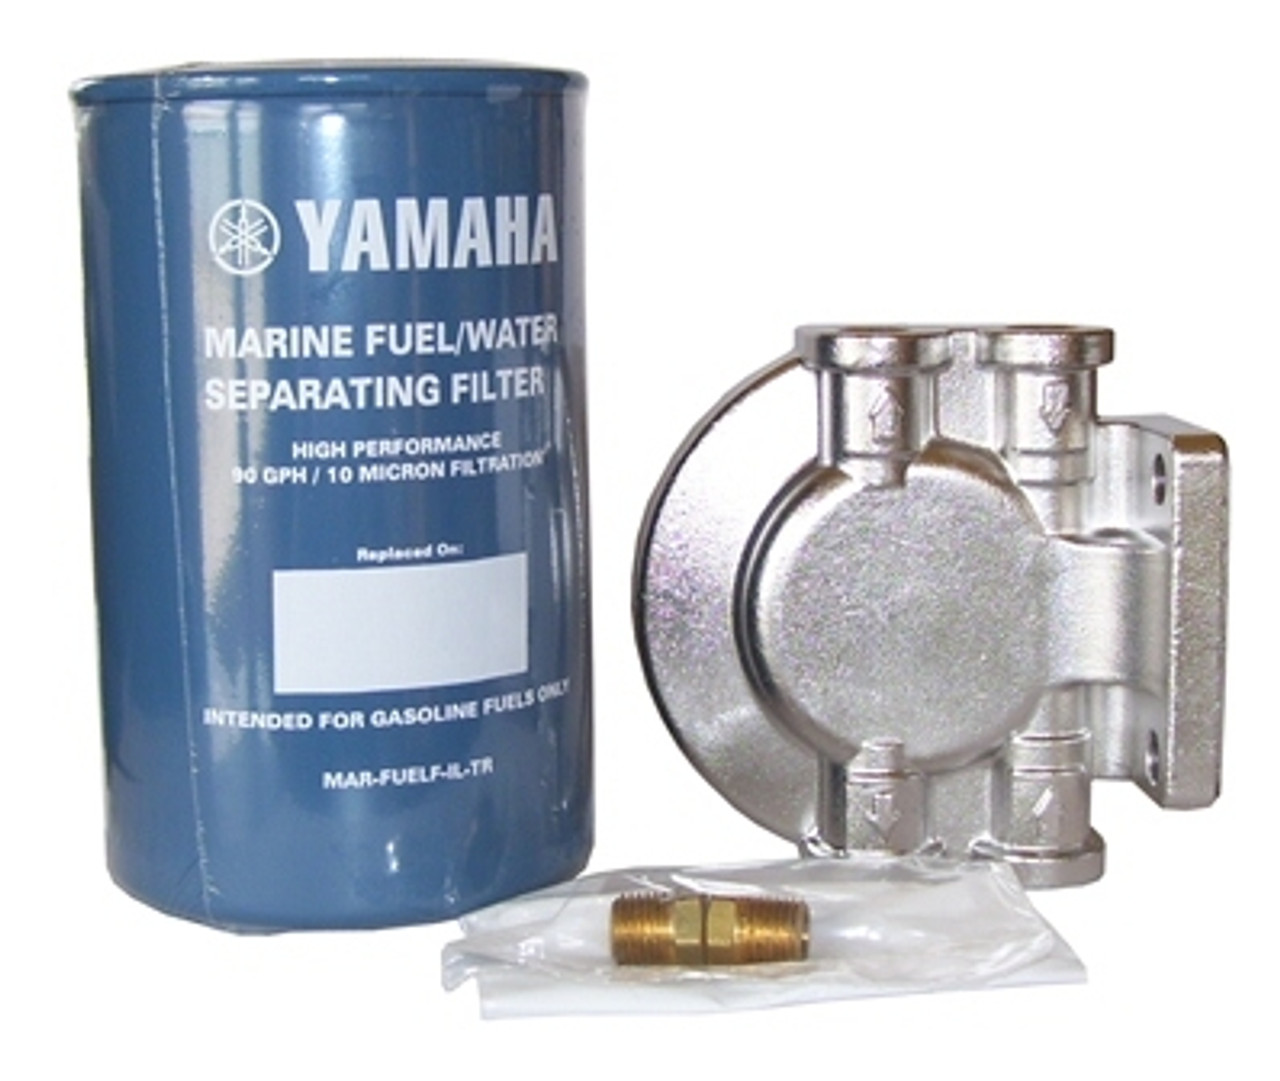 Buy Wholesale stainless steel fuel filter With Worldwide Shipping